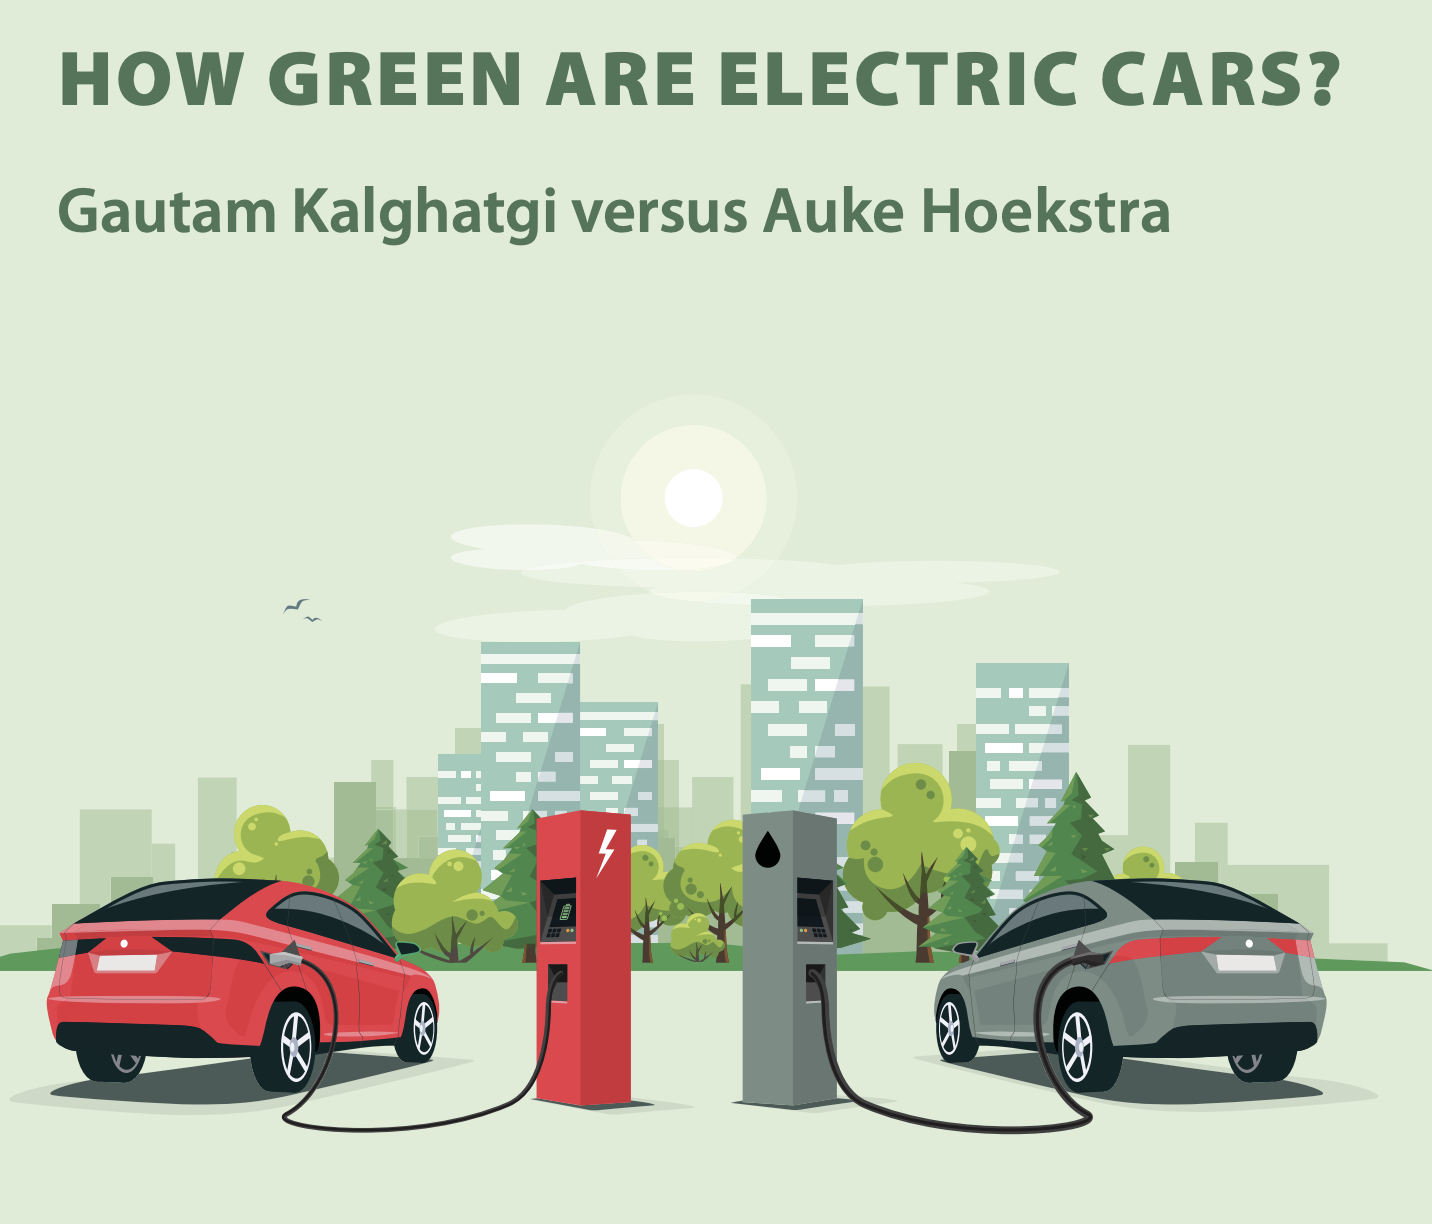 How Green Are Electric Cars? The Global Warming Policy Foundation